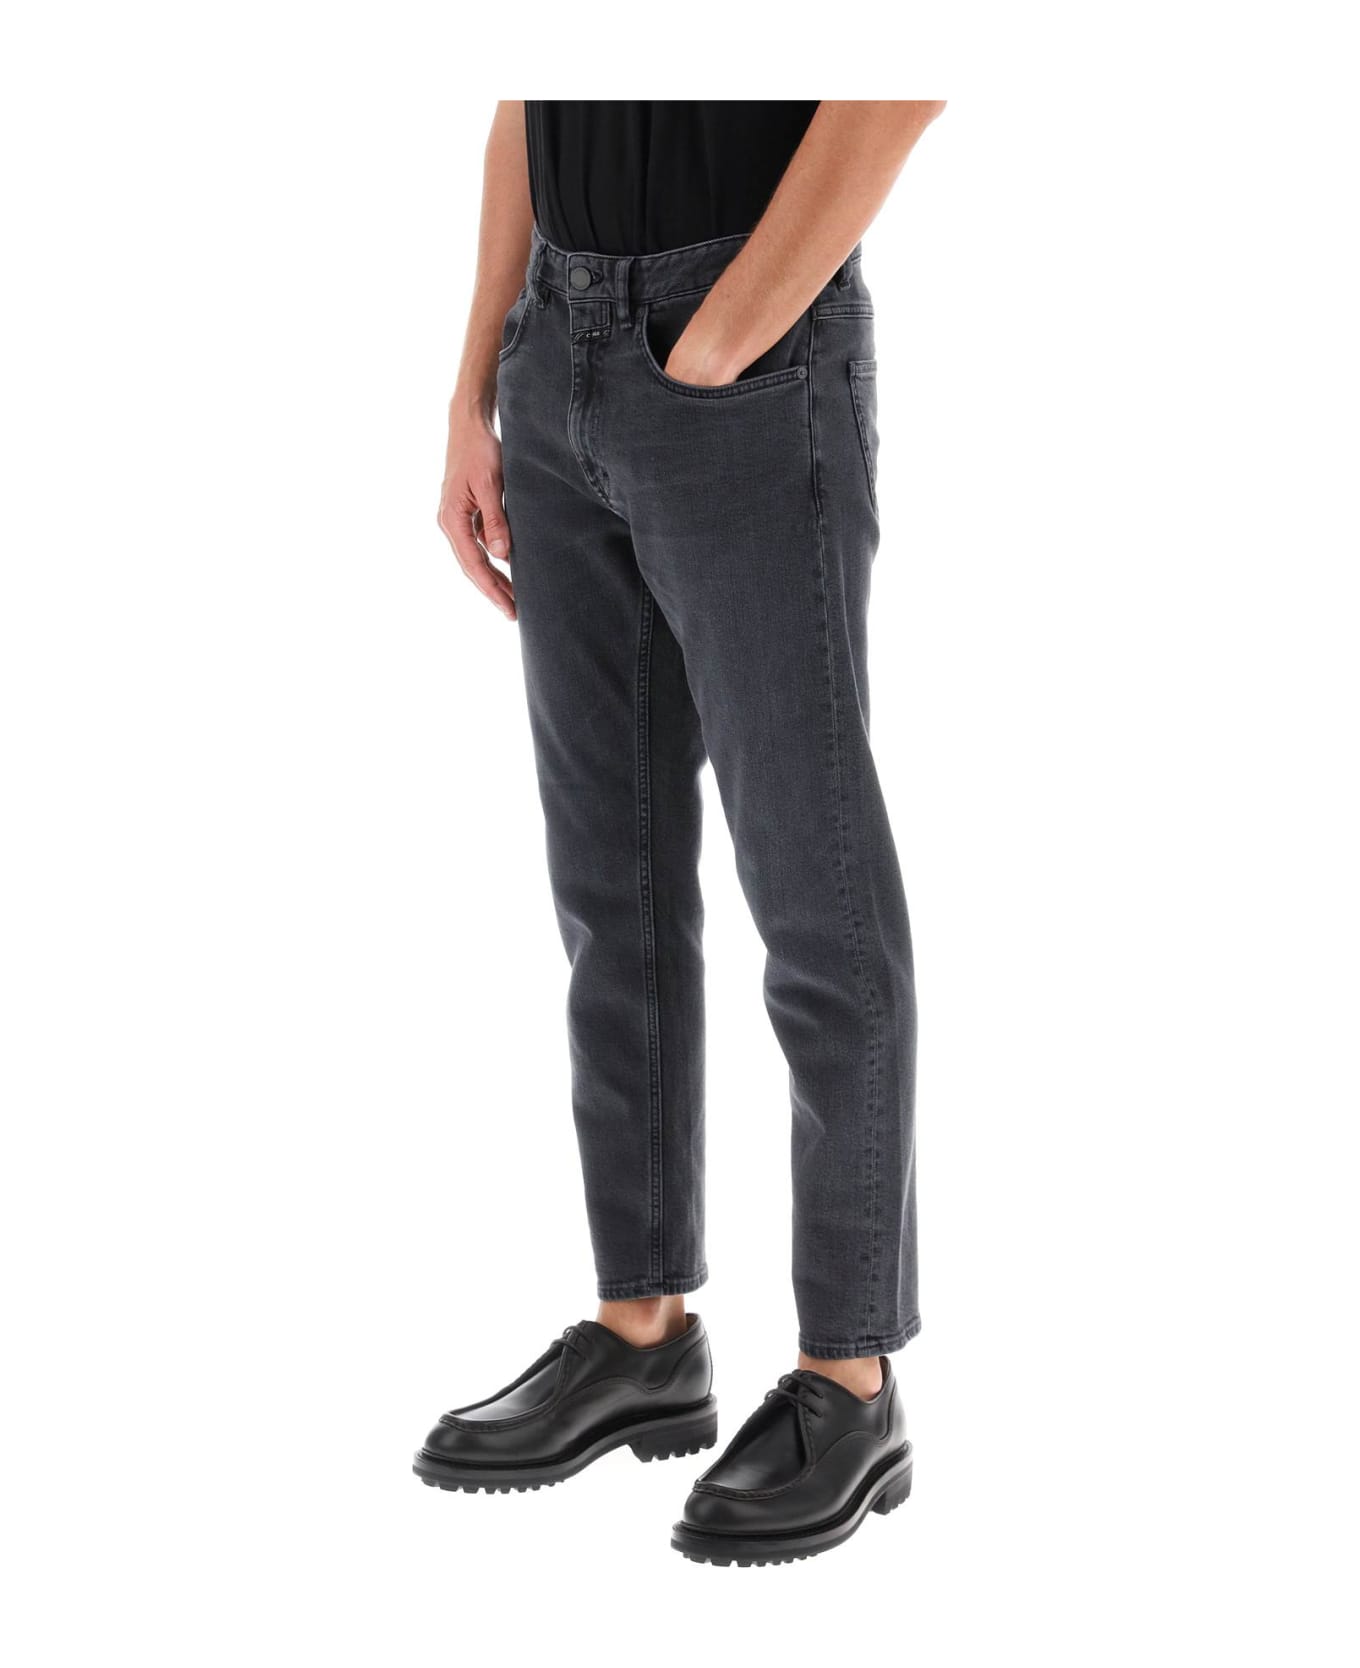 Closed Cooper Jeans With Tapered Cut - DARK GREY (Grey)